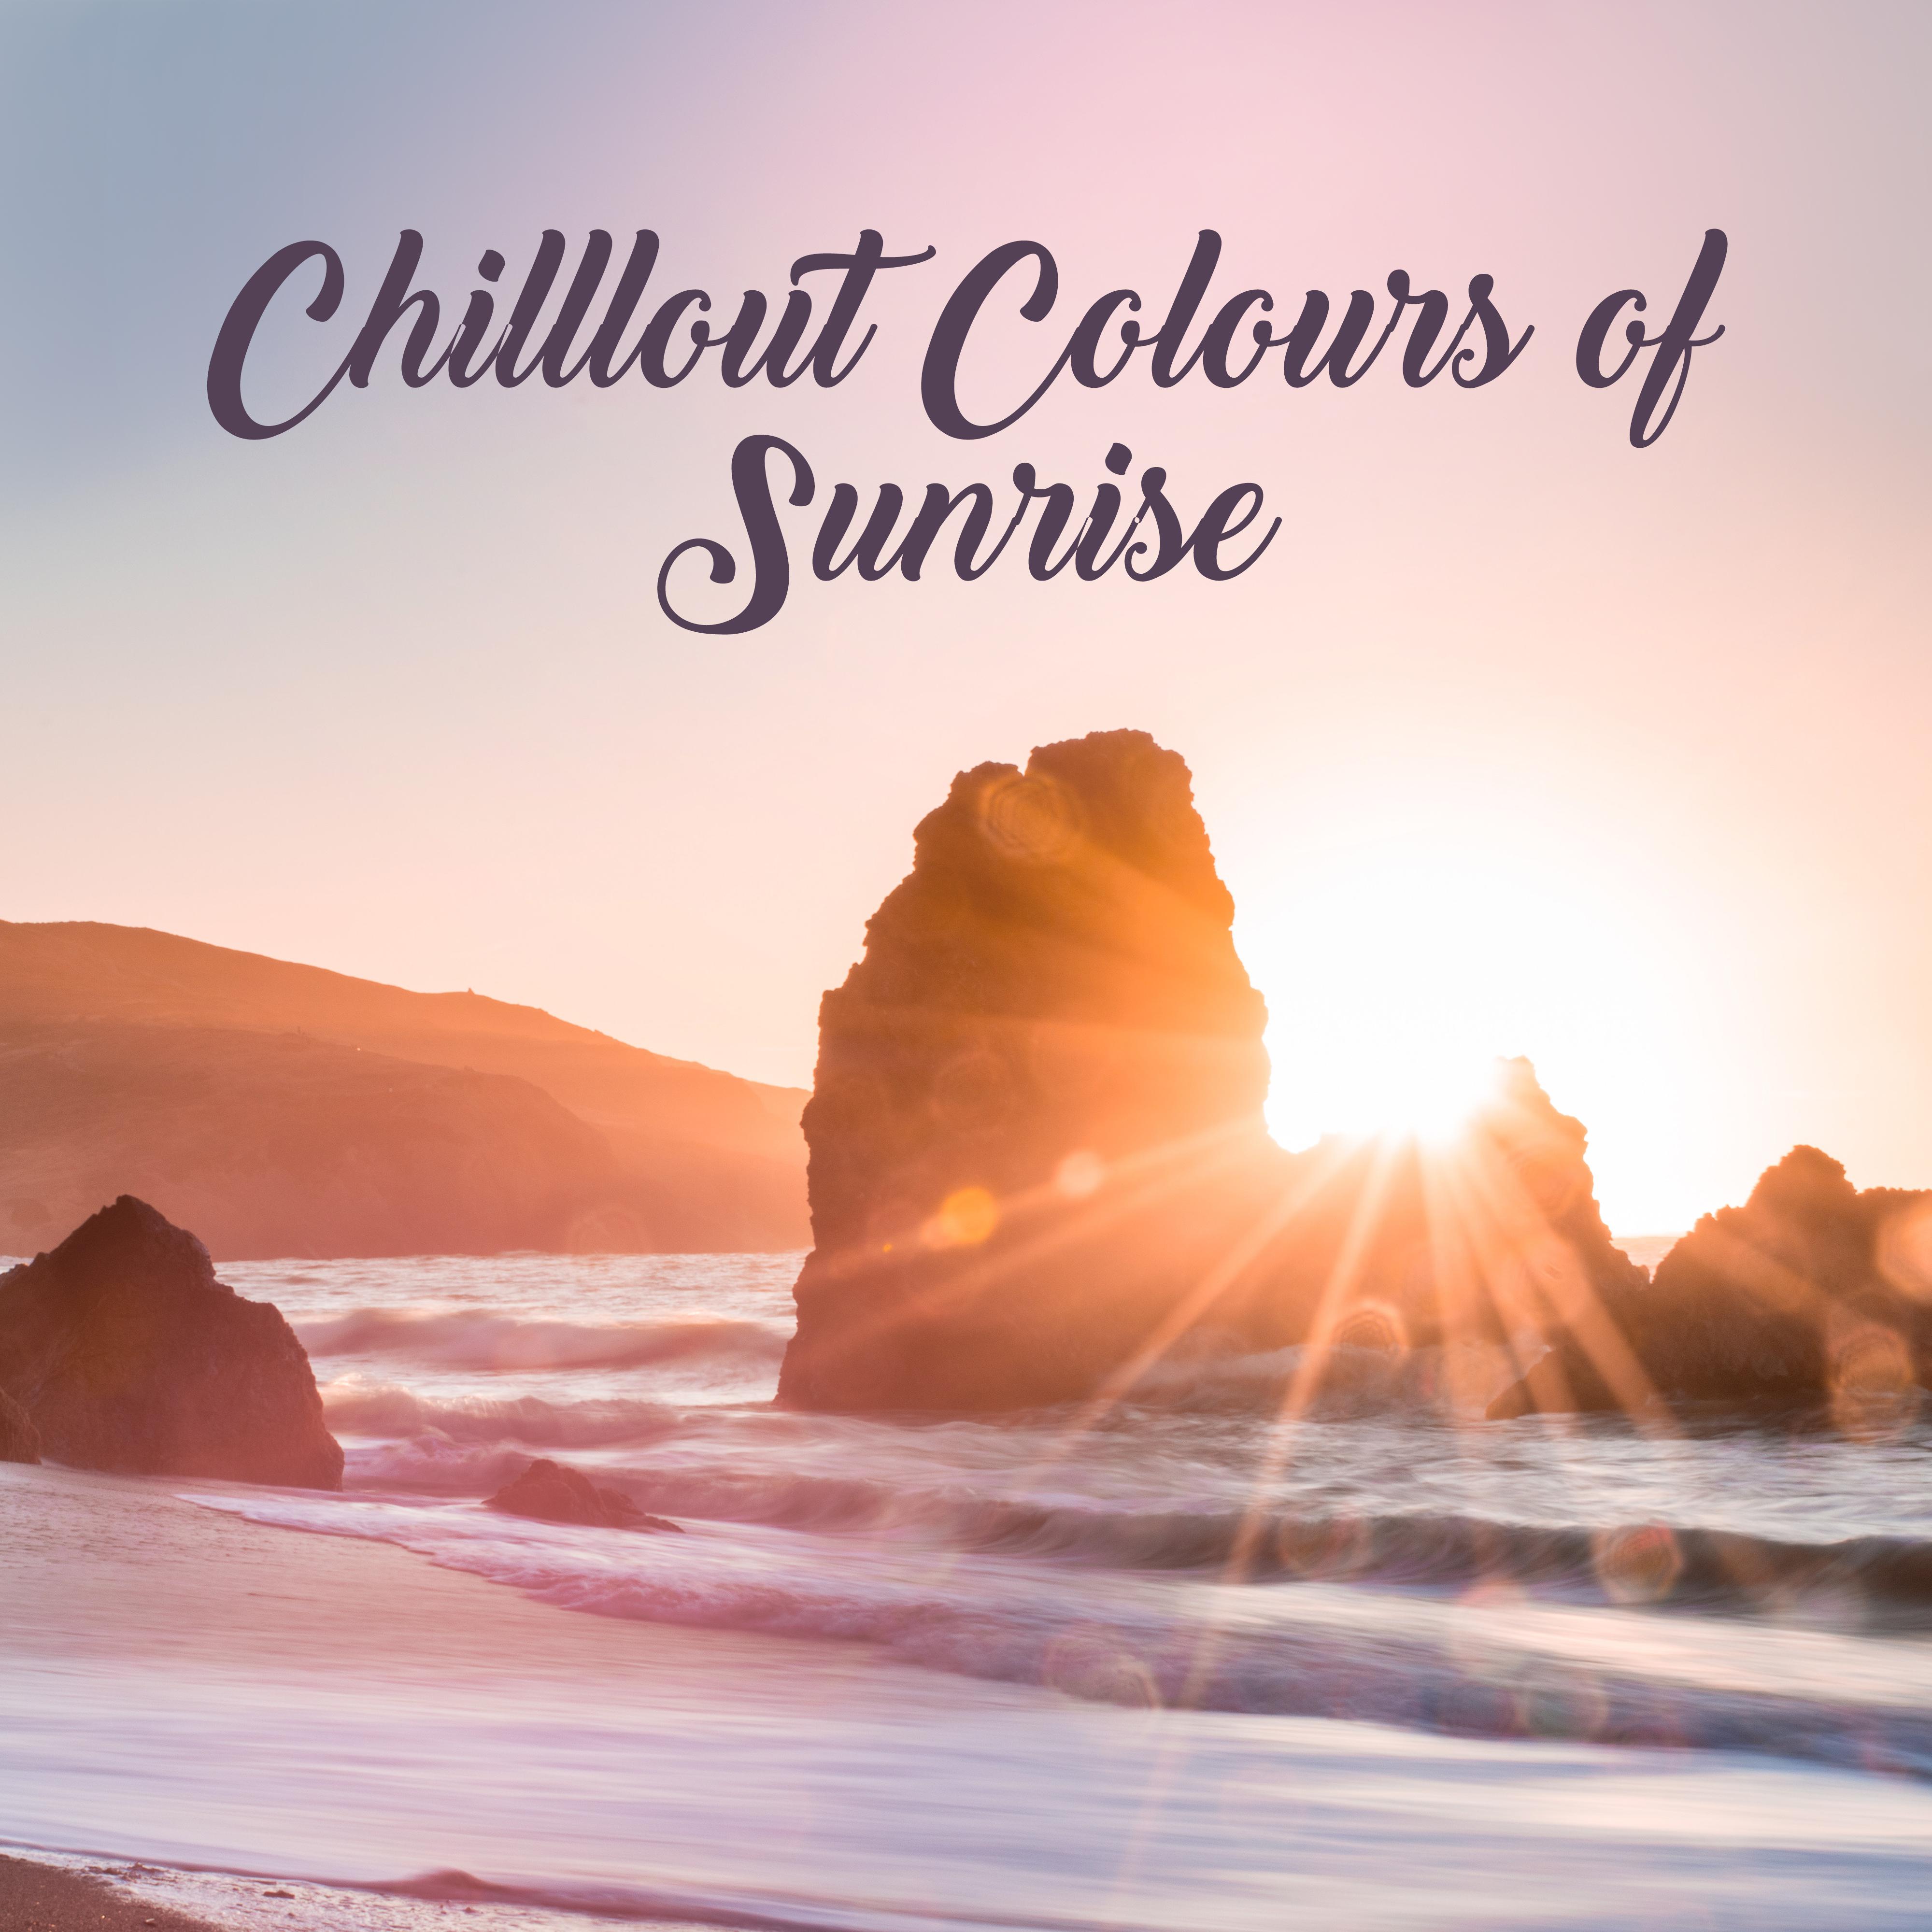 Chilllout Colours of Sunrise: 15 Hypnotic Songs for Relax on the Beach, Fresh 2019 Beats